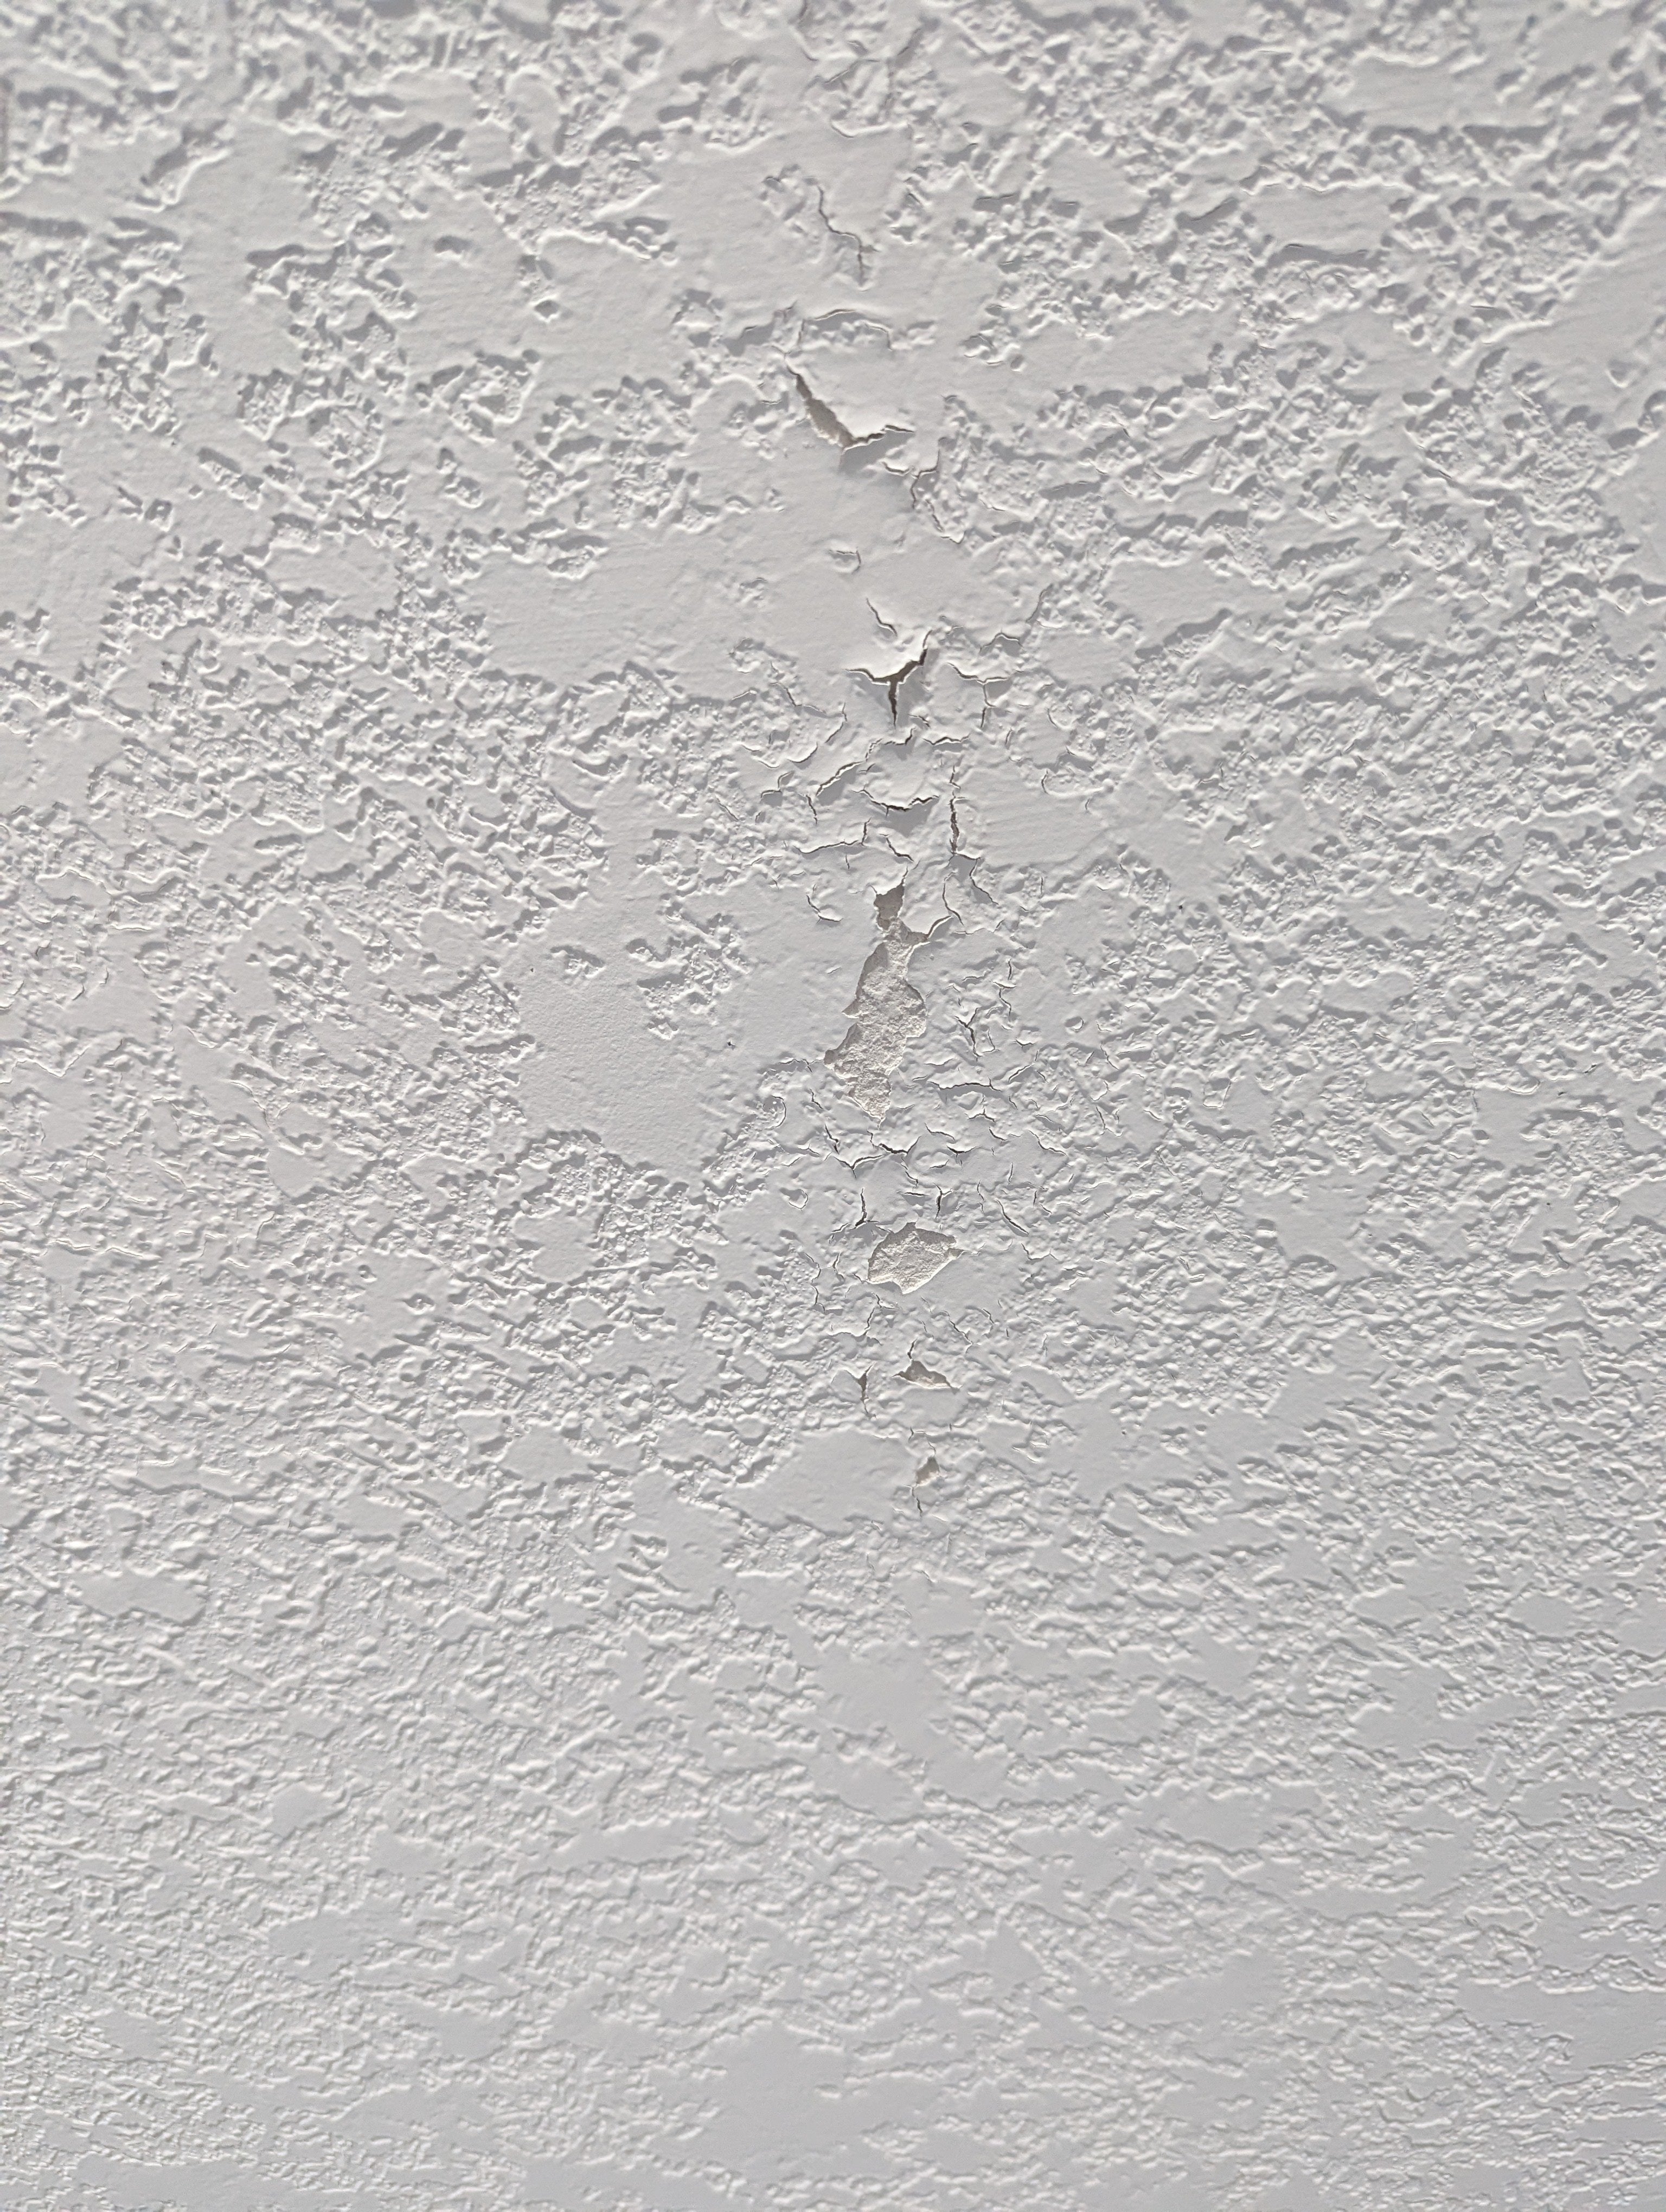 Paint Flaking Ling After Spraying